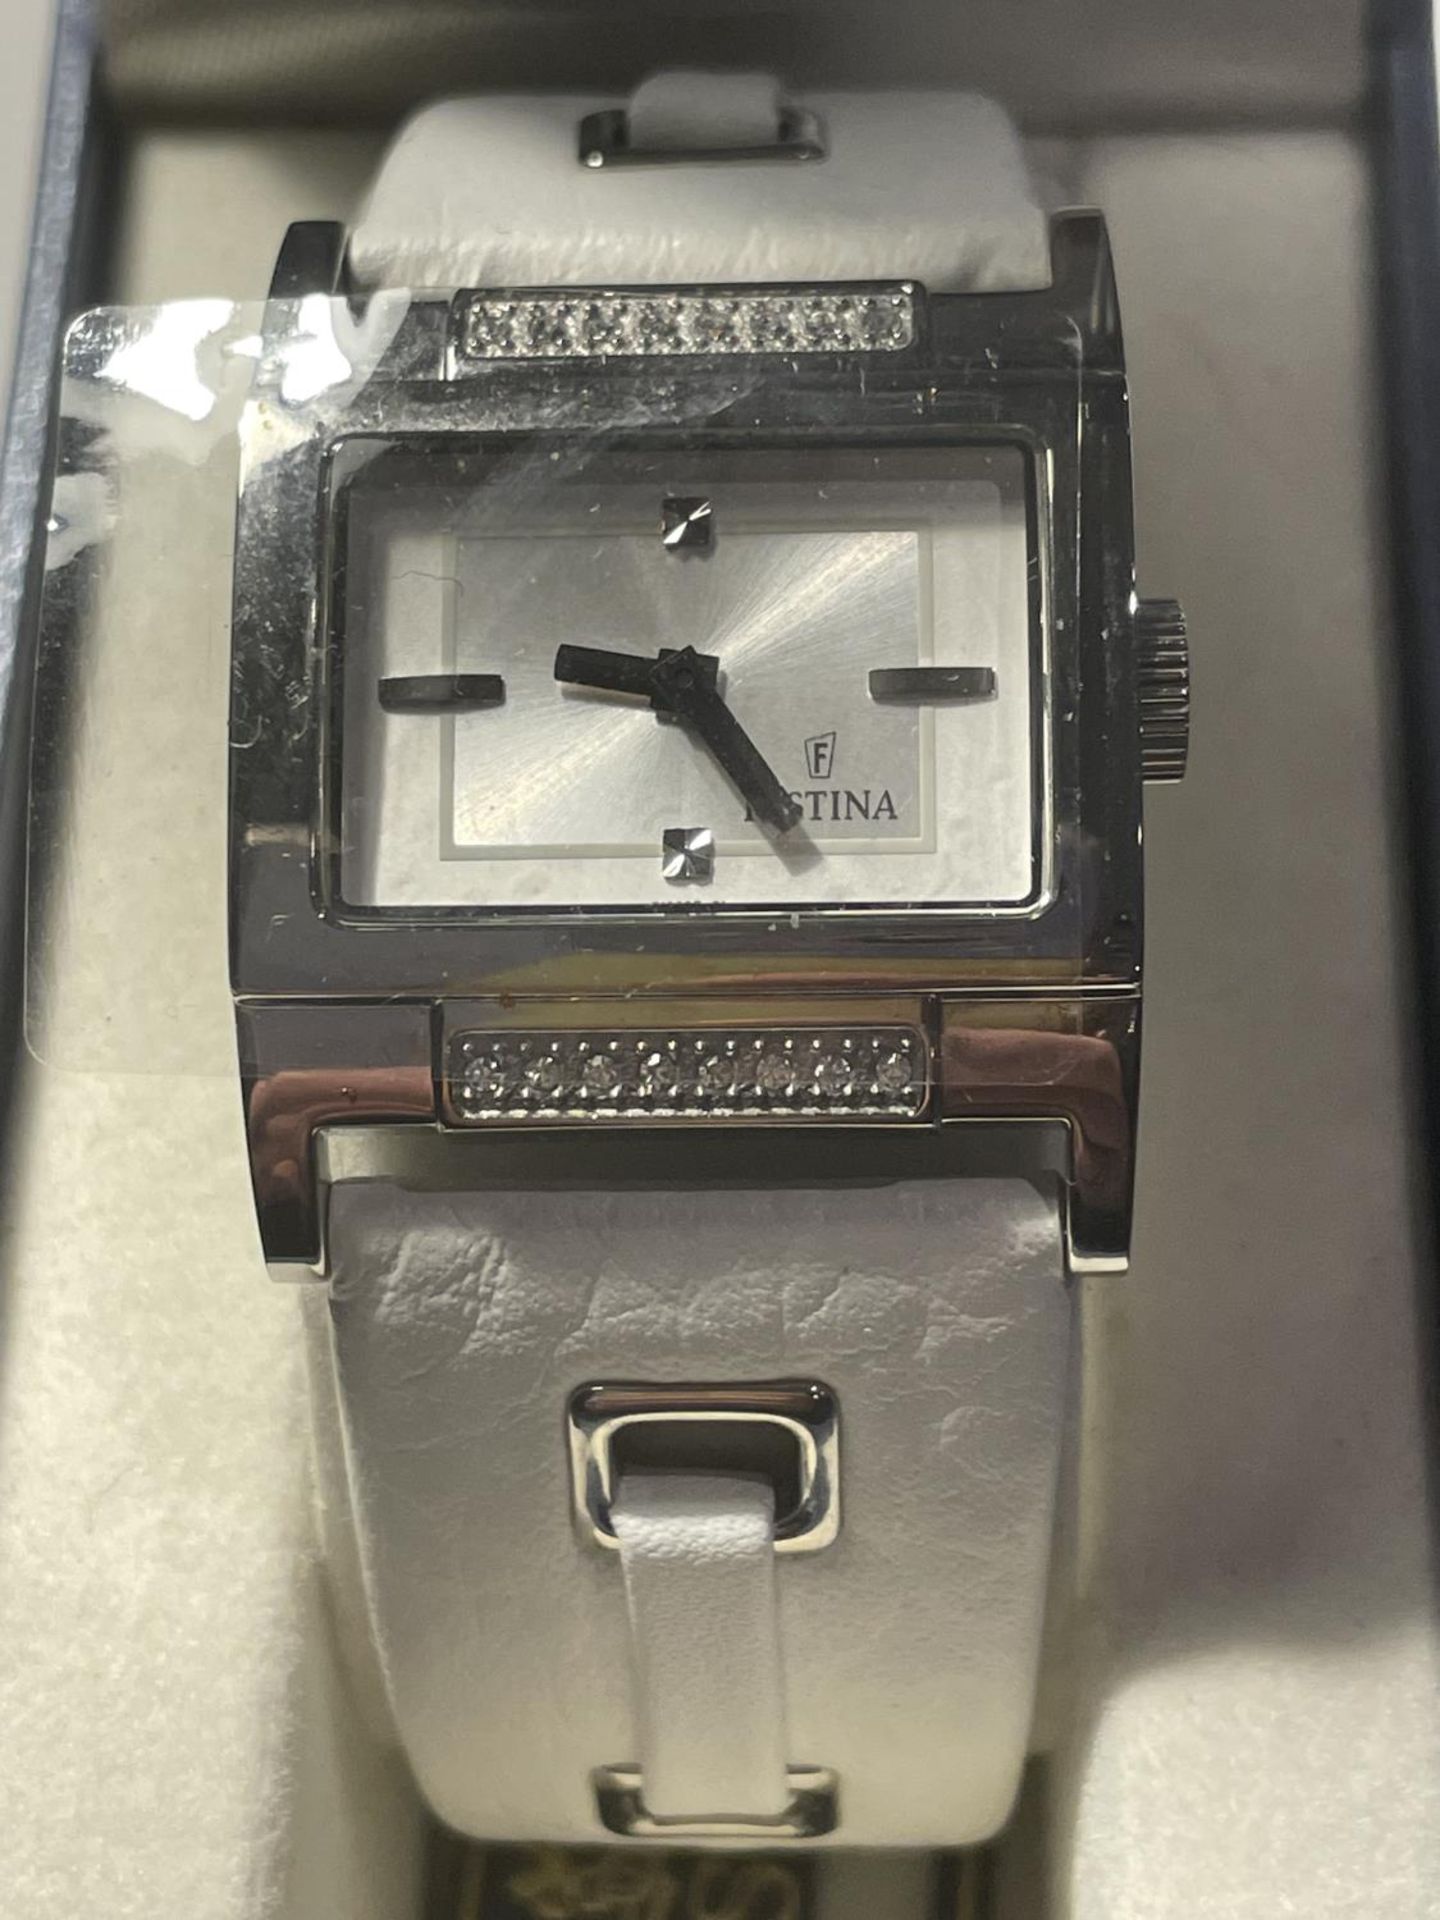 A FESTINA WRISTWATCH IN A PRESENTATION BOX SEEN WORKING BUT NO WARRANTY - Image 2 of 3